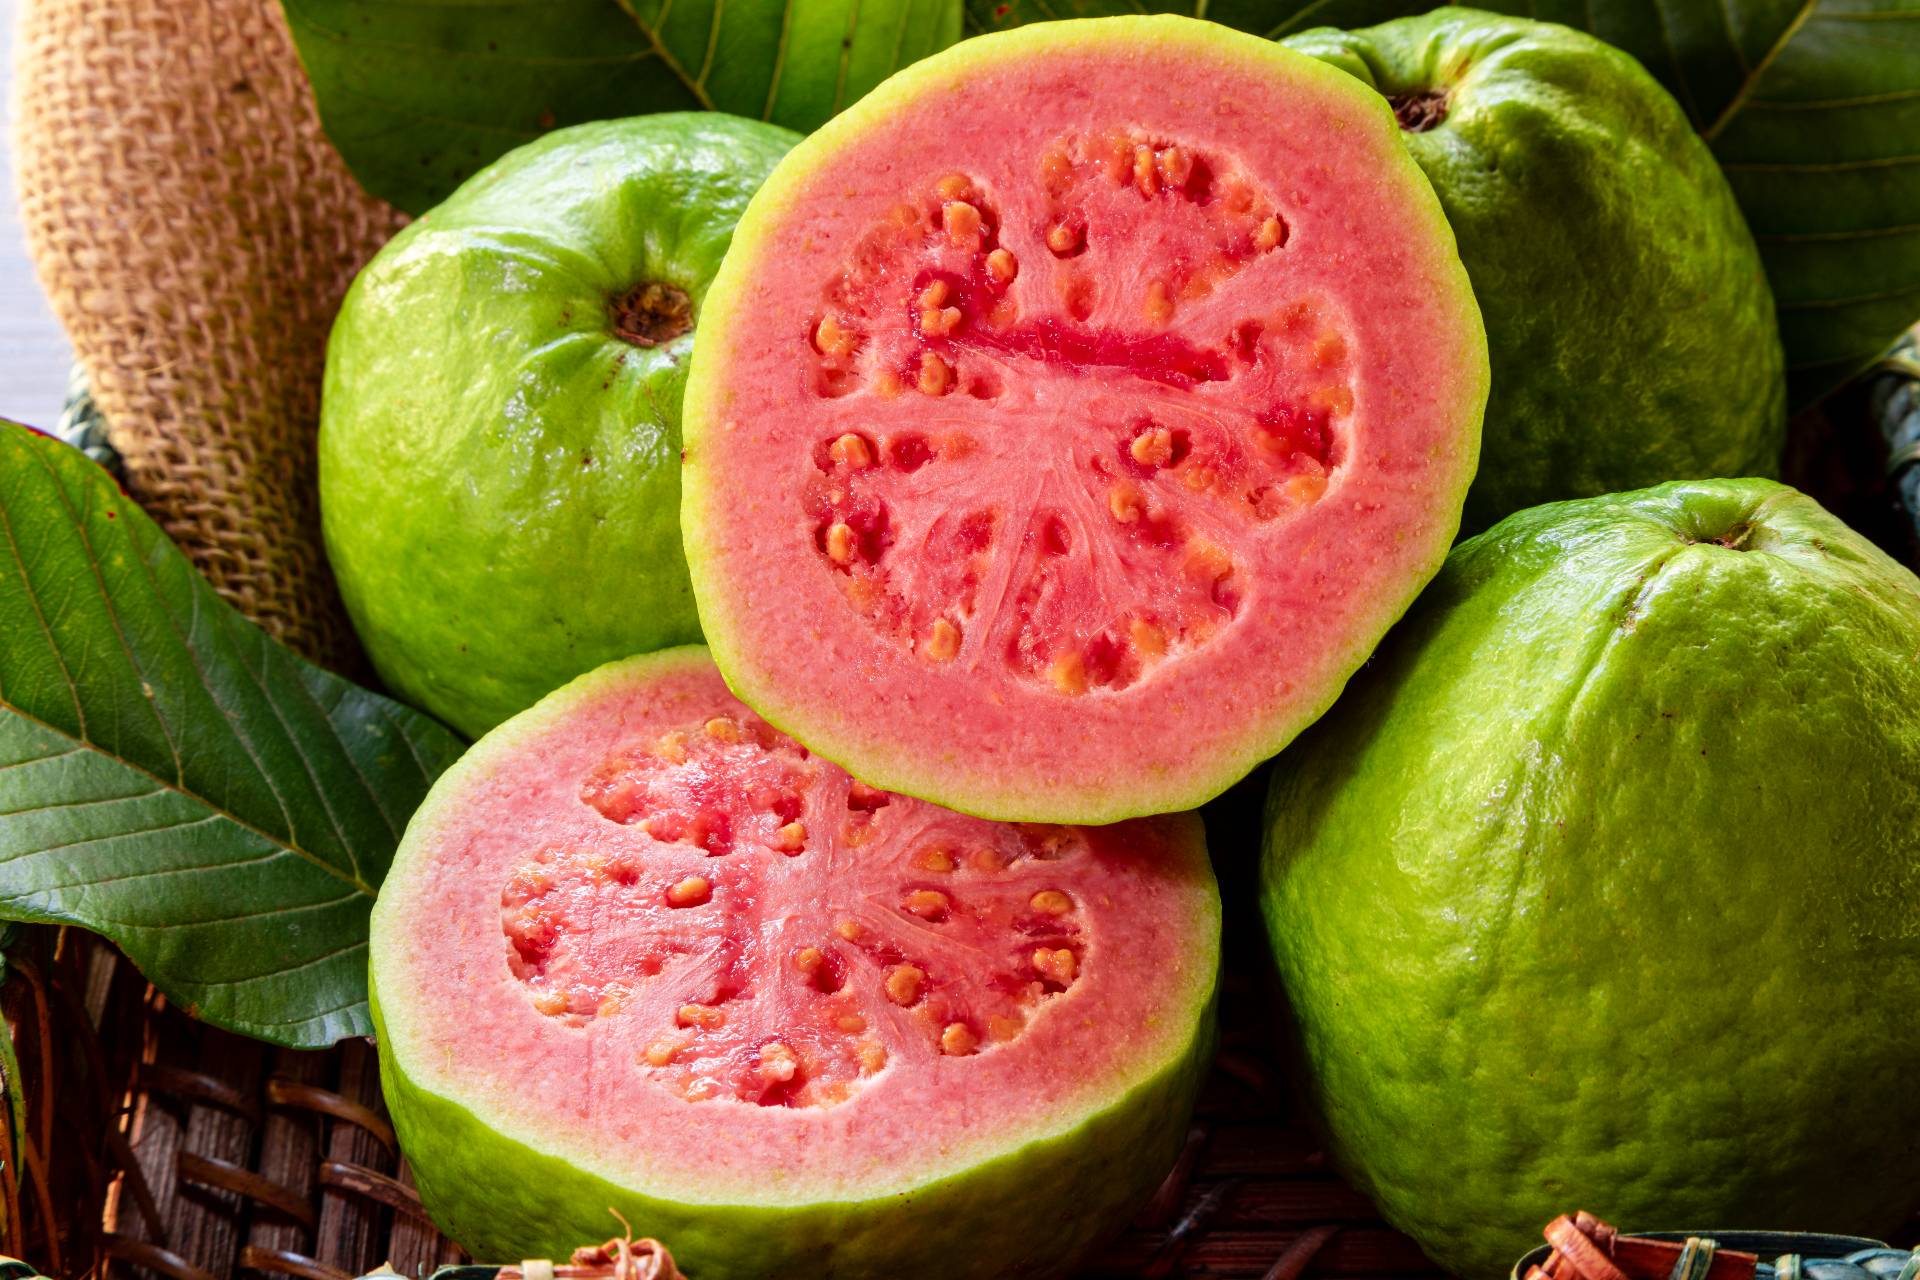 What color is a ripe guava?